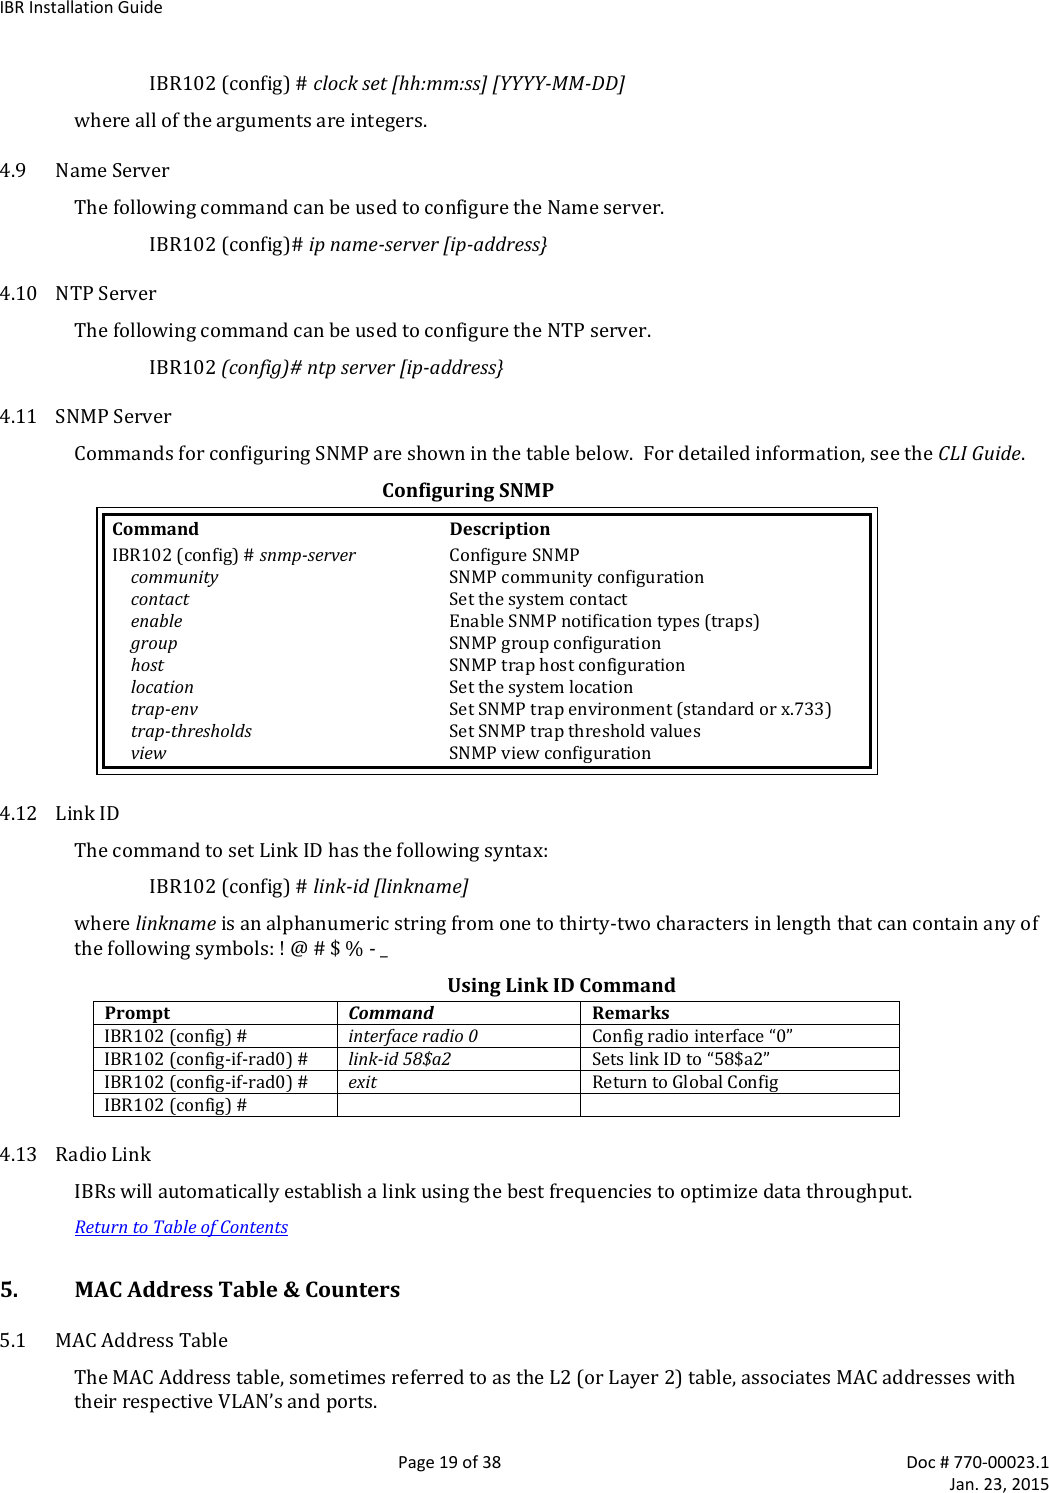 IBR Installation Guide   Page 19 of 38  Doc # 770-00023.1     Jan. 23, 2015 IBR102 (config) # clock set [hh:mm:ss] [YYYY-MM-DD] where all of the arguments are integers. 4.9 Name Server The following command can be used to configure the Name server. IBR102 (config)# ip name-server [ip-address} 4.10 NTP Server The following command can be used to configure the NTP server. IBR102 (config)# ntp server [ip-address} 4.11 SNMP Server Commands for configuring SNMP are shown in the table below.  For detailed information, see the CLI Guide. Configuring SNMP Command  Description IBR102 (config) # snmp-server  Configure SNMP  community  SNMP community configuration  contact  Set the system contact   enable  Enable SNMP notification types (traps)  group  SNMP group configuration  host  SNMP trap host configuration  location  Set the system location   trap-env  Set SNMP trap environment (standard or x.733)   trap-thresholds  Set SNMP trap threshold values  view  SNMP view configuration 4.12 Link ID The command to set Link ID has the following syntax: IBR102 (config) # link-id [linkname] where linkname is an alphanumeric string from one to thirty-two characters in length that can contain any of the following symbols: ! @ # $ % - _ Using Link ID Command Prompt Command Remarks IBR102 (config) # interface radio 0 Config radio interface “0” IBR102 (config-if-rad0) # link-id 58$a2 Sets link ID to “58$a2” IBR102 (config-if-rad0) # exit Return to Global Config IBR102 (config) #   4.13 Radio Link IBRs will automatically establish a link using the best frequencies to optimize data throughput. Return to Table of Contents 5. MAC Address Table &amp; Counters  5.1 MAC Address Table The MAC Address table, sometimes referred to as the L2 (or Layer 2) table, associates MAC addresses with their respective VLAN’s and ports. 